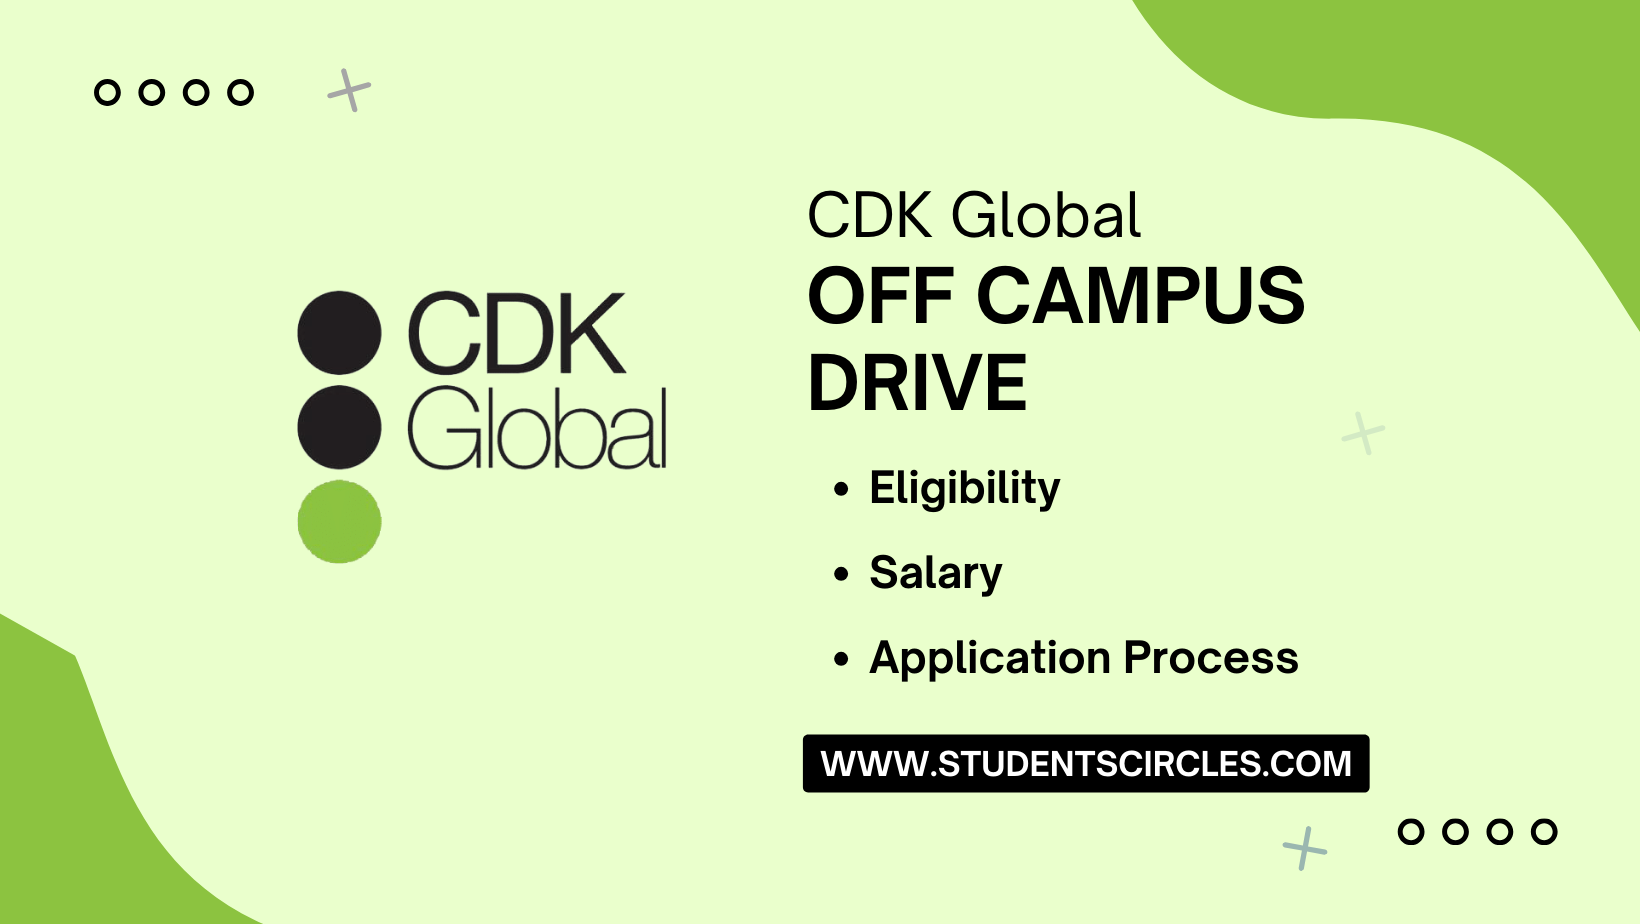 CDK Global Off Campus Drive